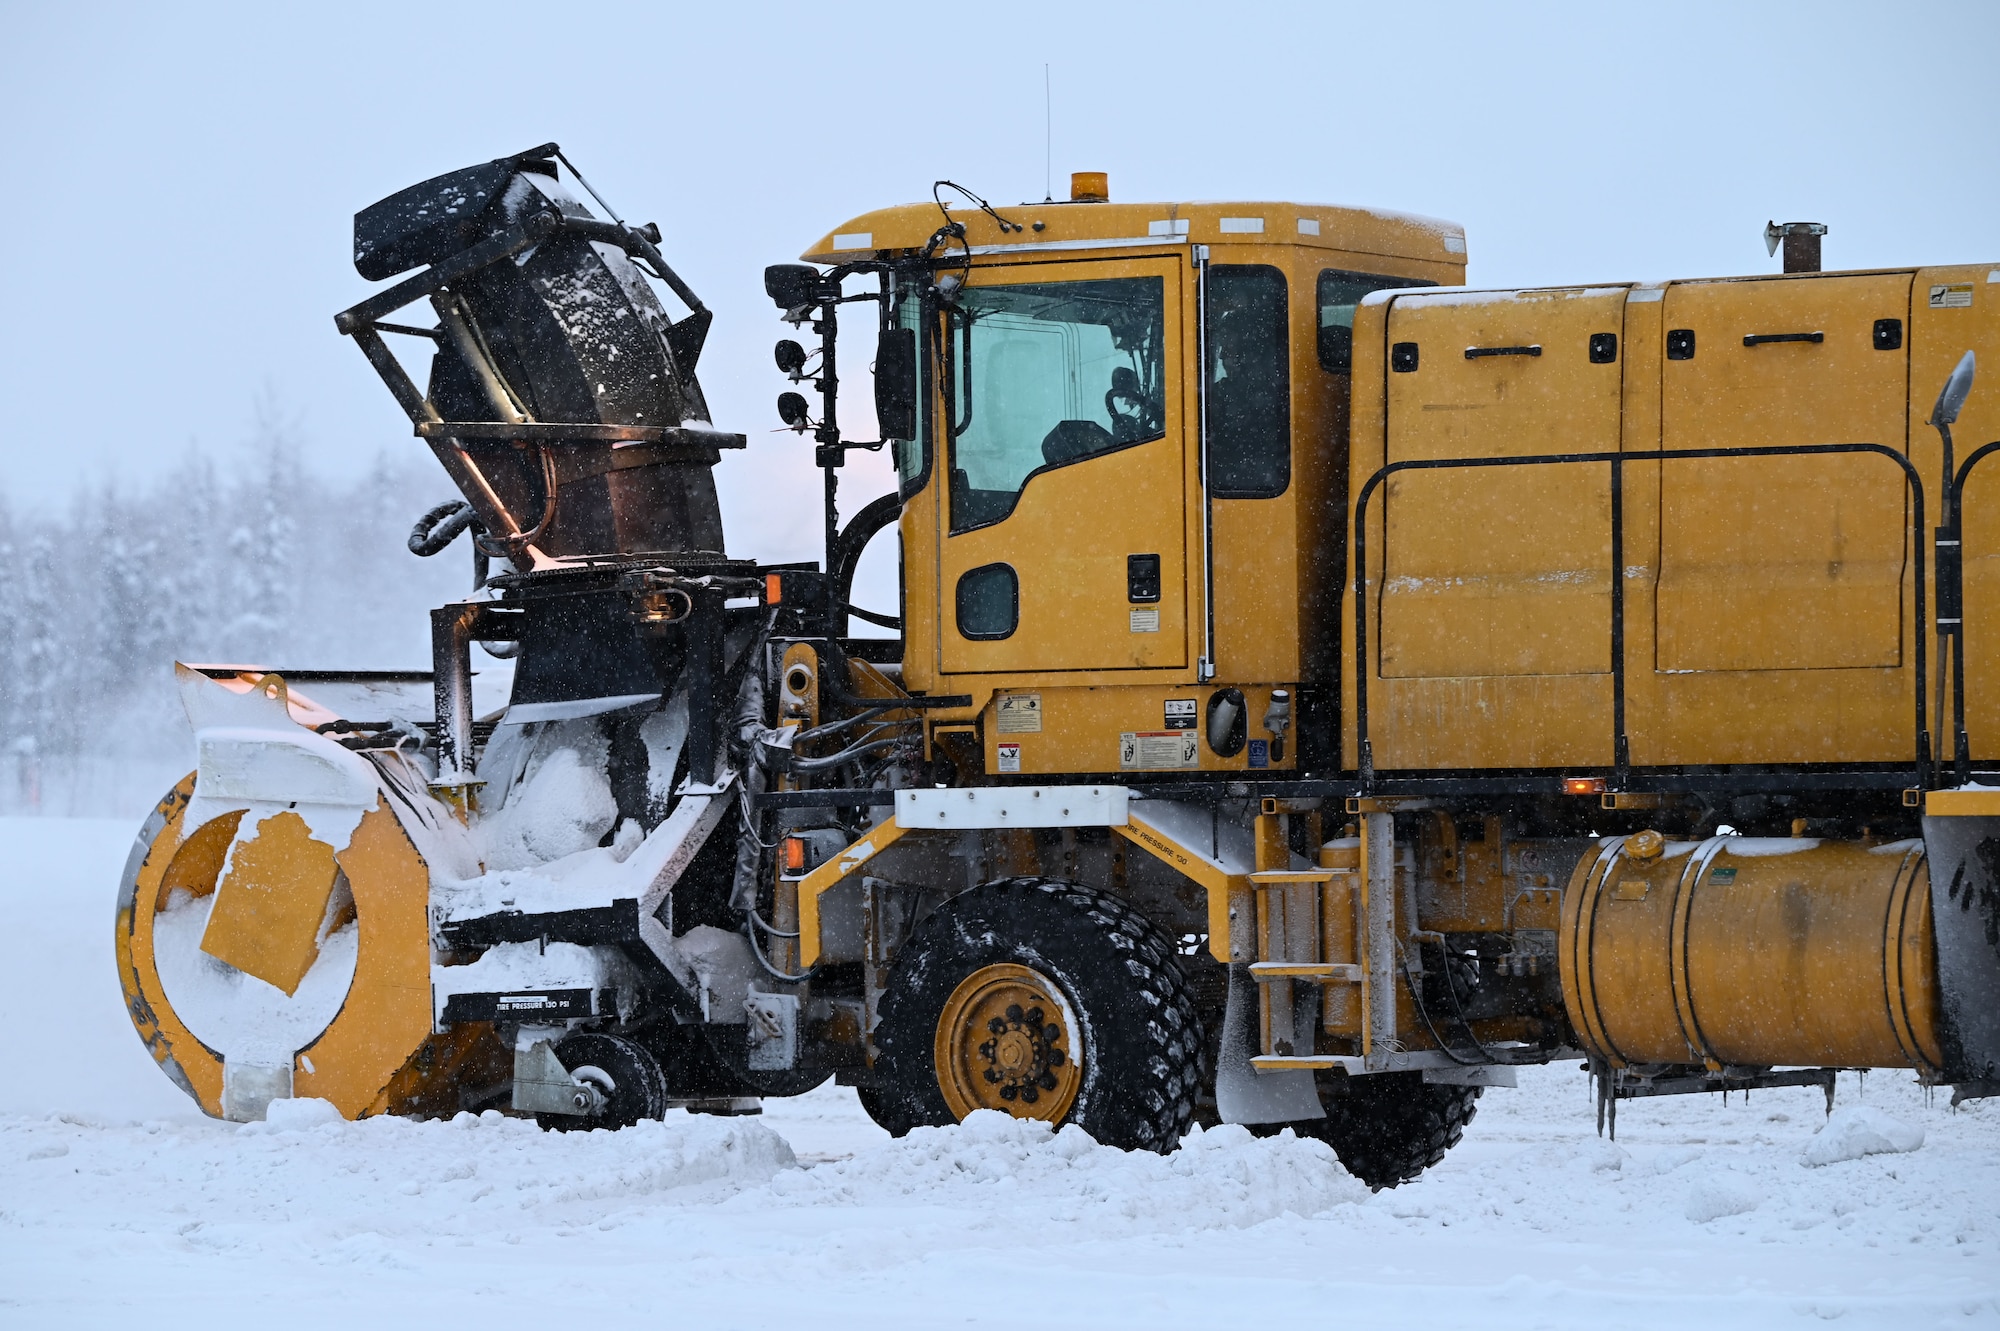 U.S. Air Force Airmen assigned to the 354th Civil Engineer Squadron wait in snow brooms on the flight line at Eielson Air Force Base, Alaska, Jan. 23, 2023.